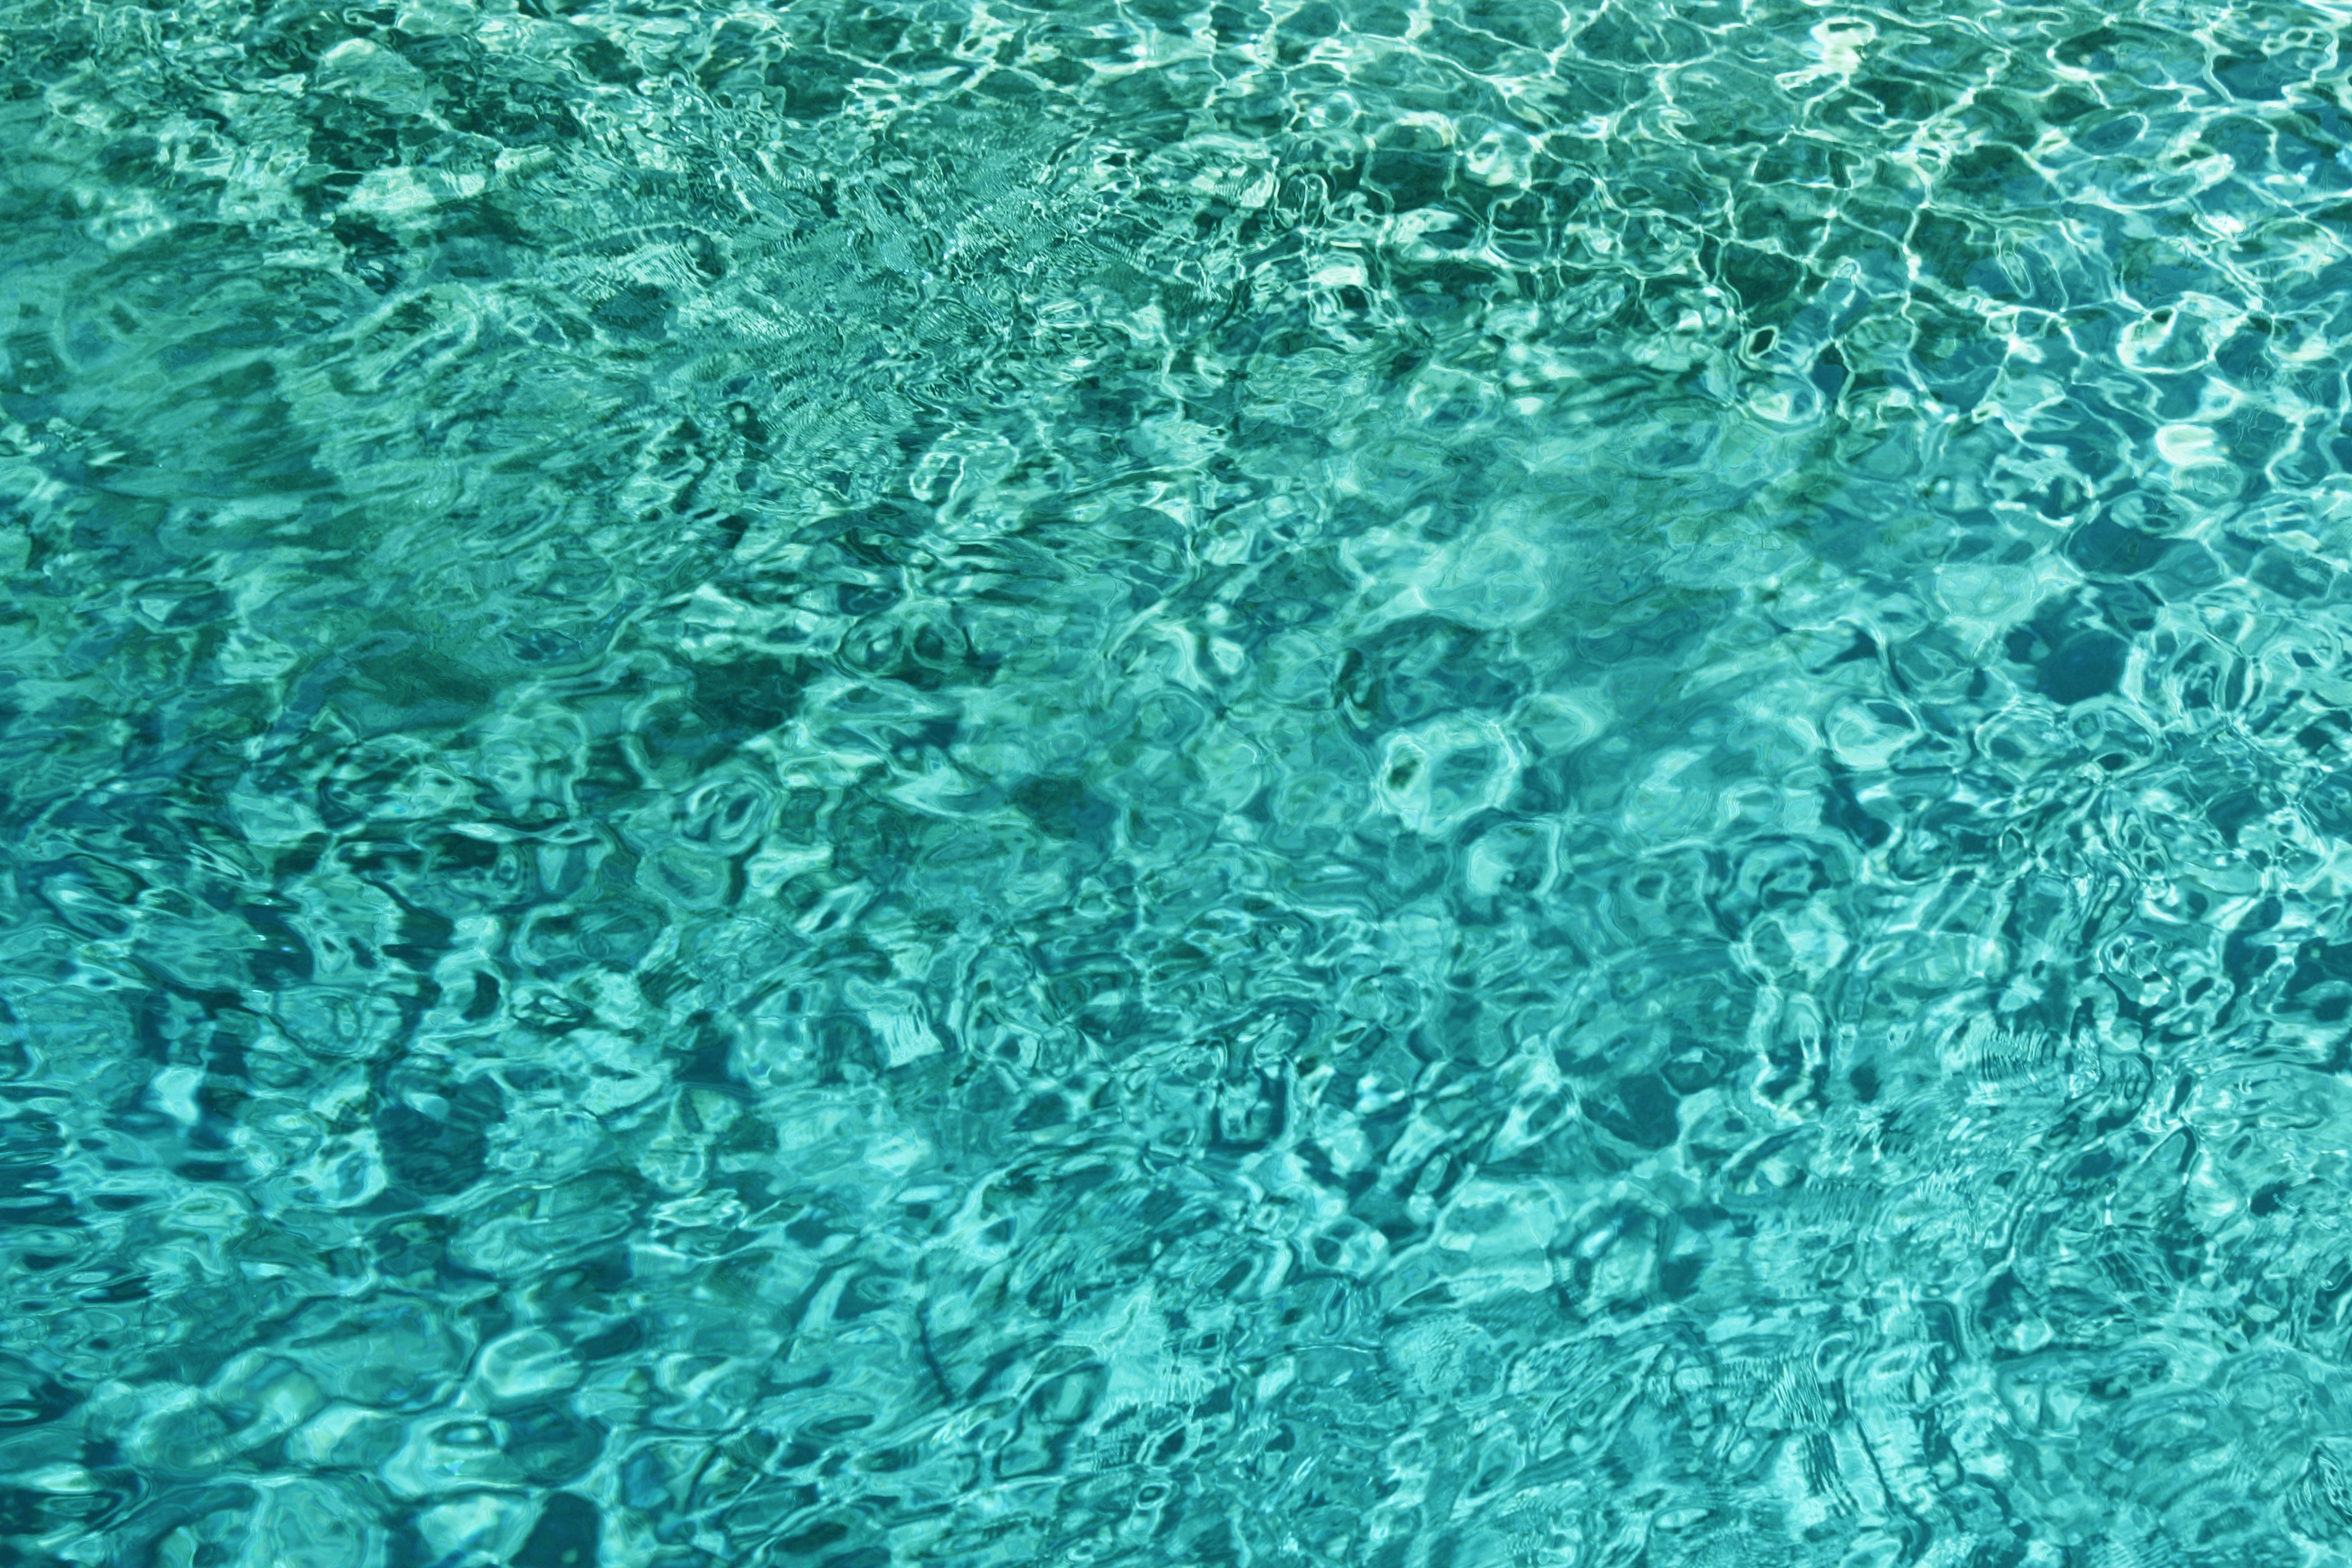 Teal Water with Ripples Texture Picture | Free Photograph | Photos ...